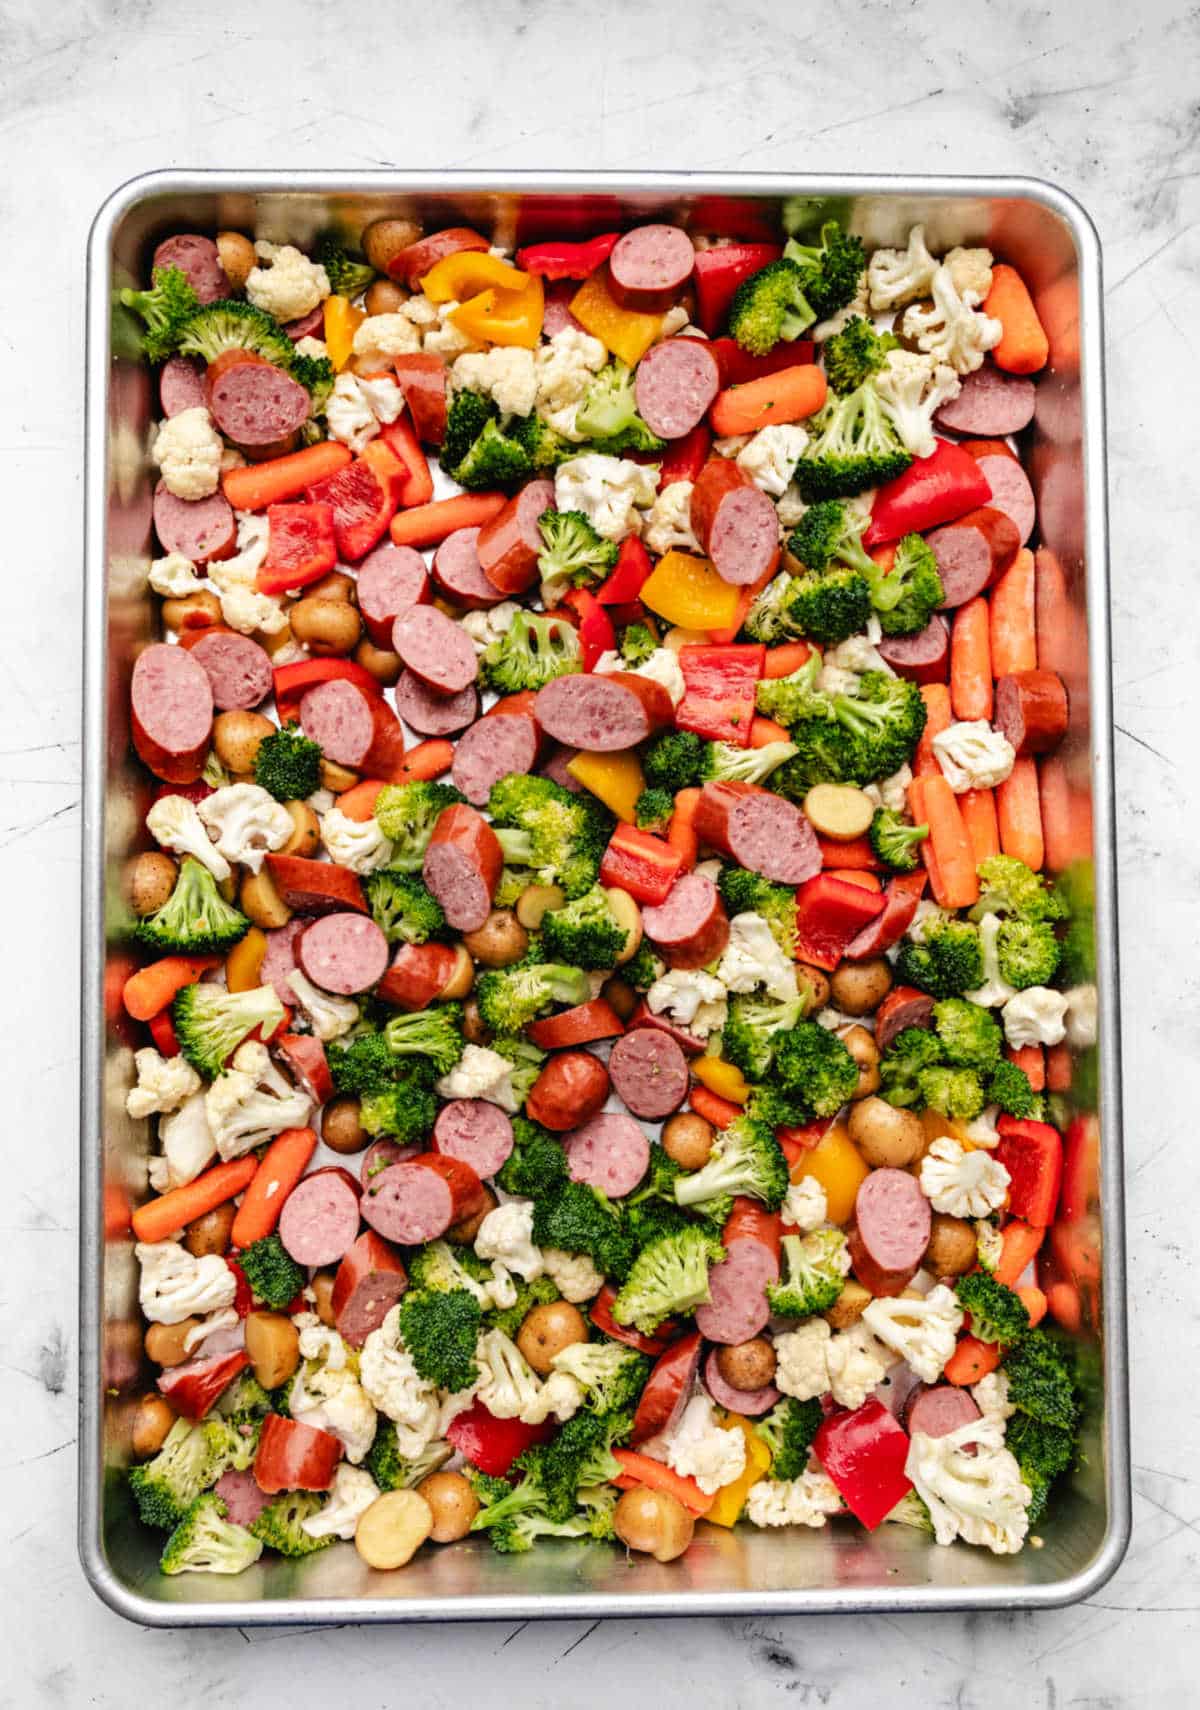 Sheet pan sausage and vegetables drizzled with olive oil.